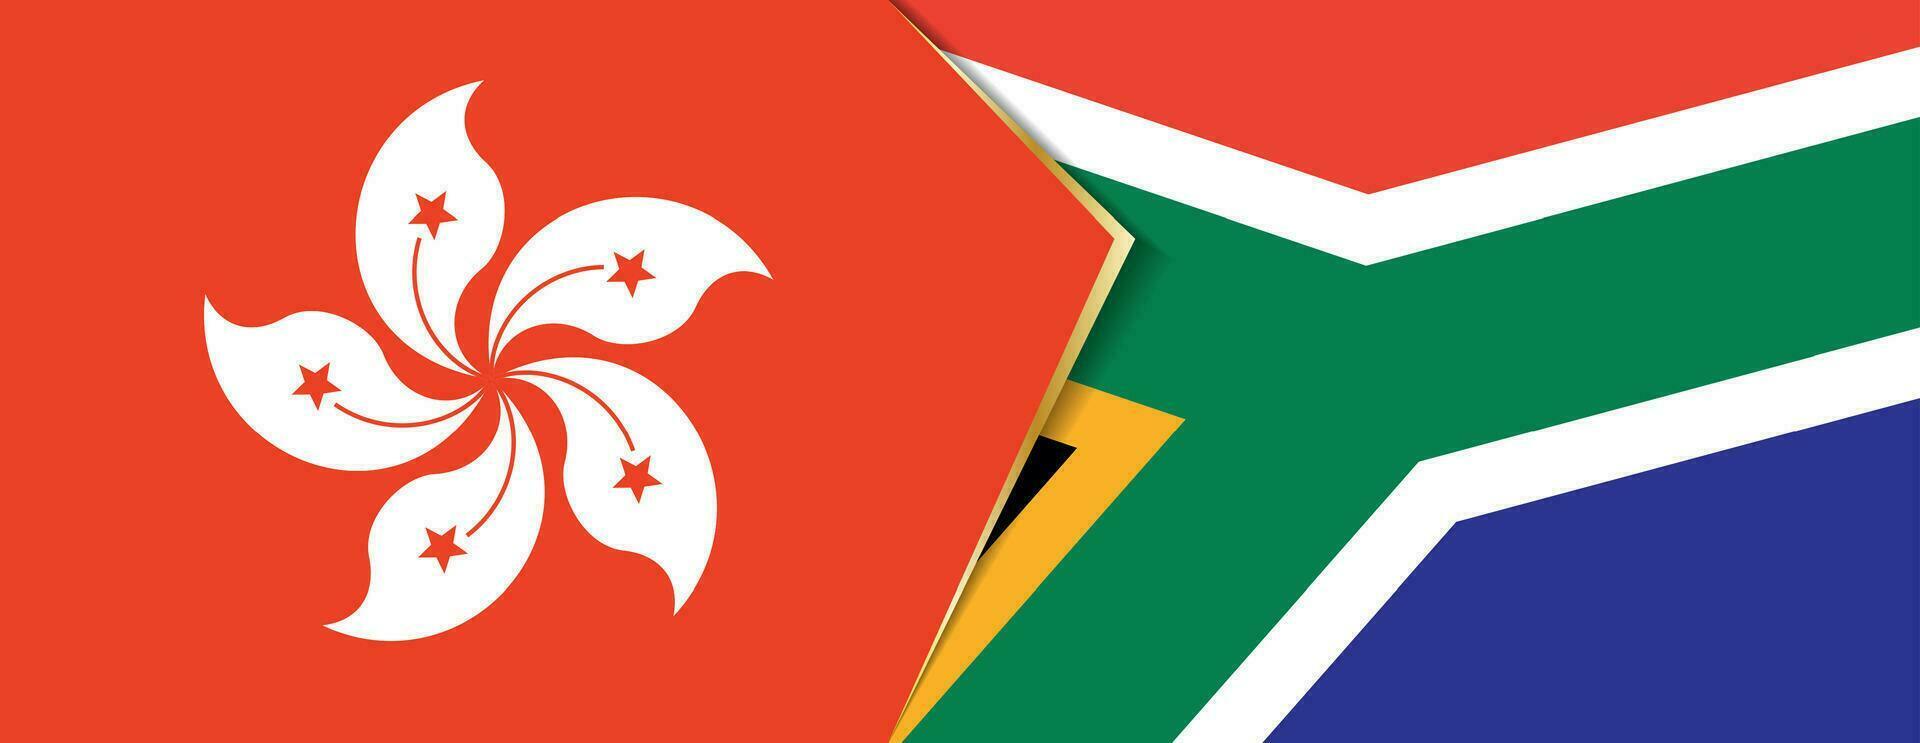 Hong Kong and South Africa flags, two vector flags.